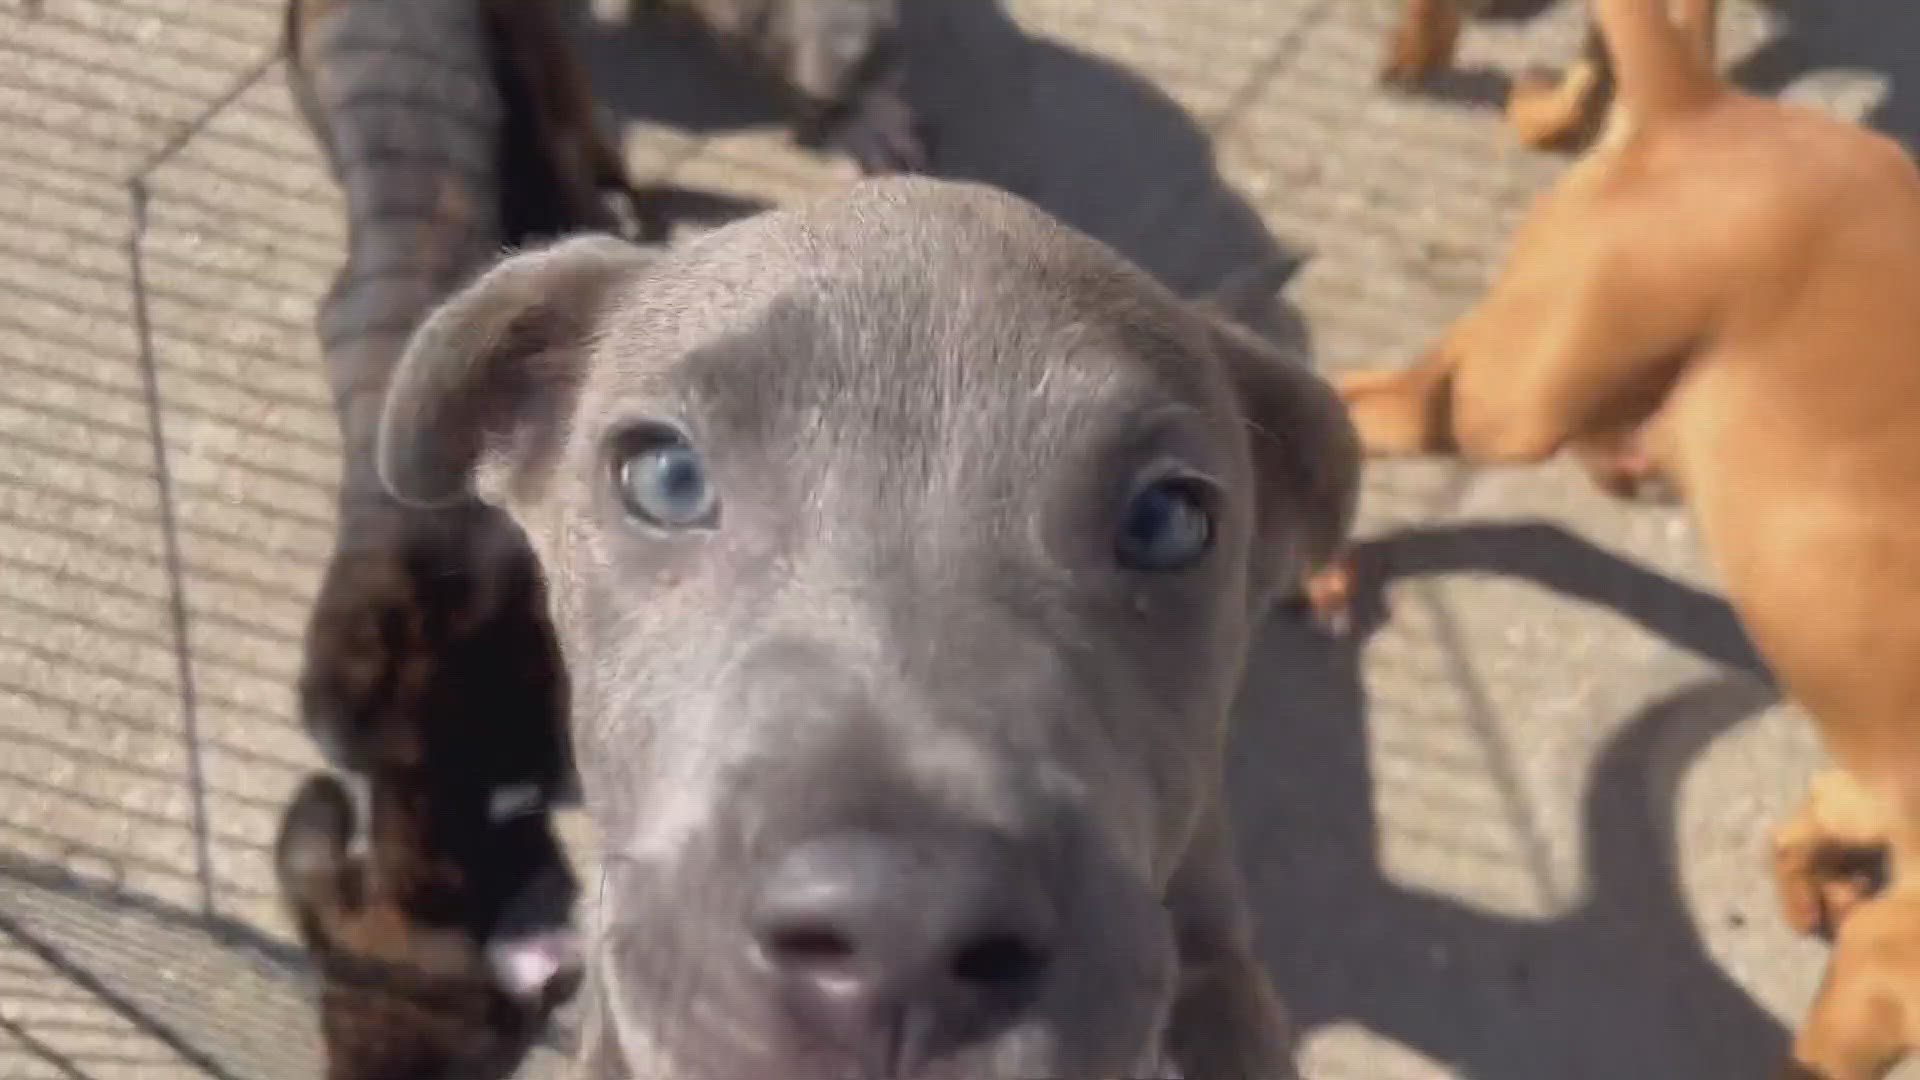 The Killeen animal shelter recently received an influx of puppies that are all looking for forever homes!